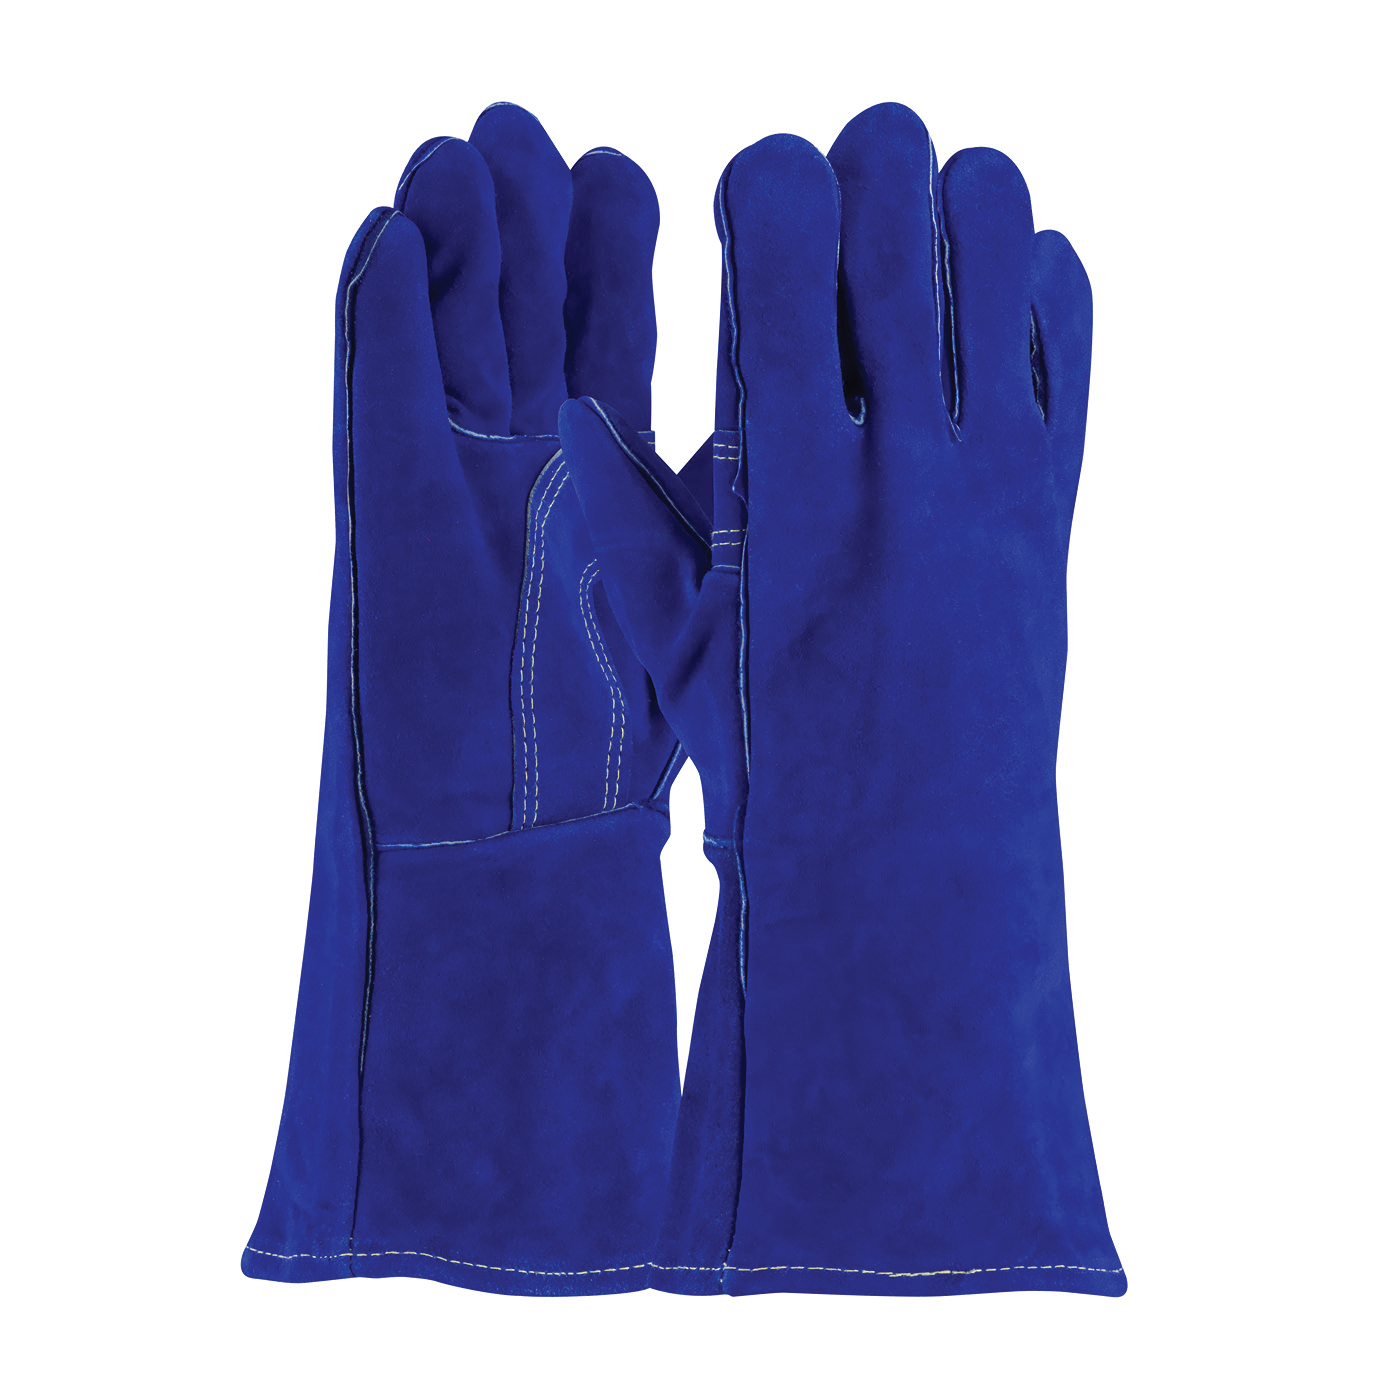 PIP® Blue Bison™ 73-7007LHO Welding Gloves, L, Split Cowhide Leather, Blue, Cotton Lining, Gauntlet Cuff, 13-1/2 in L, 1.2 mm THK Glove Material